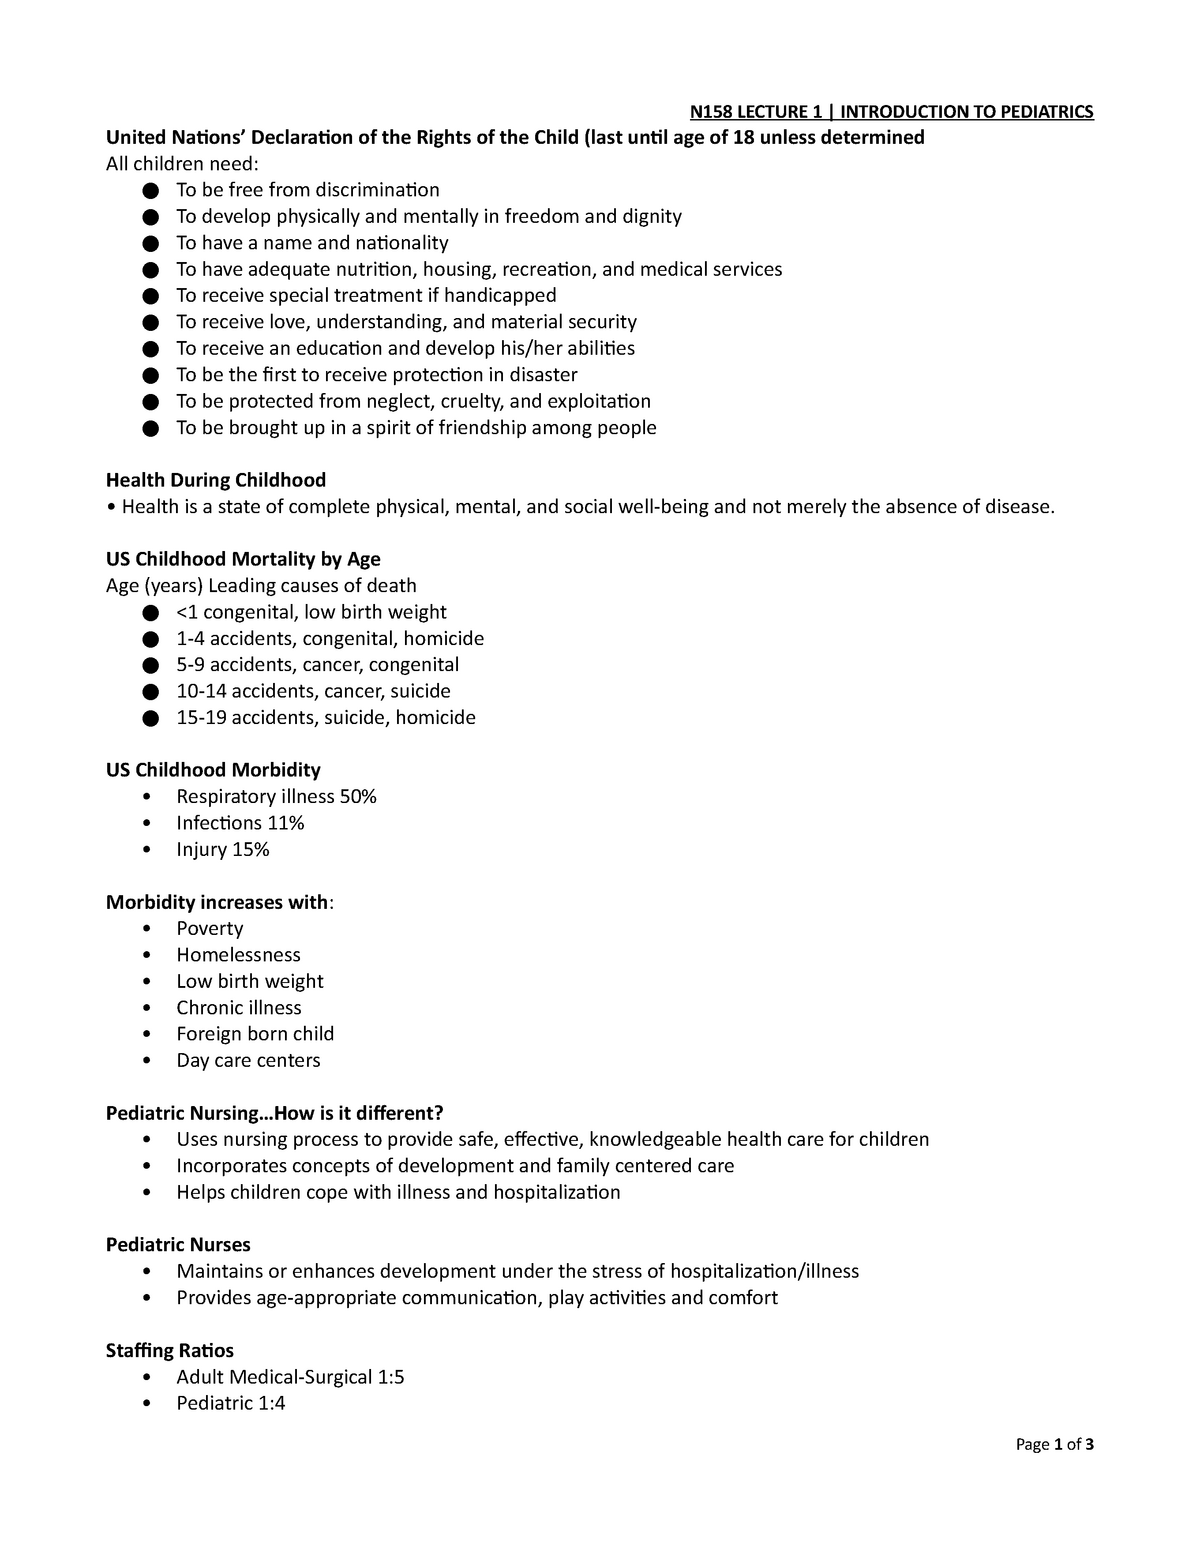 Copy of Lecture 1 Outline, introduction to pediatric nursing - N158 ...